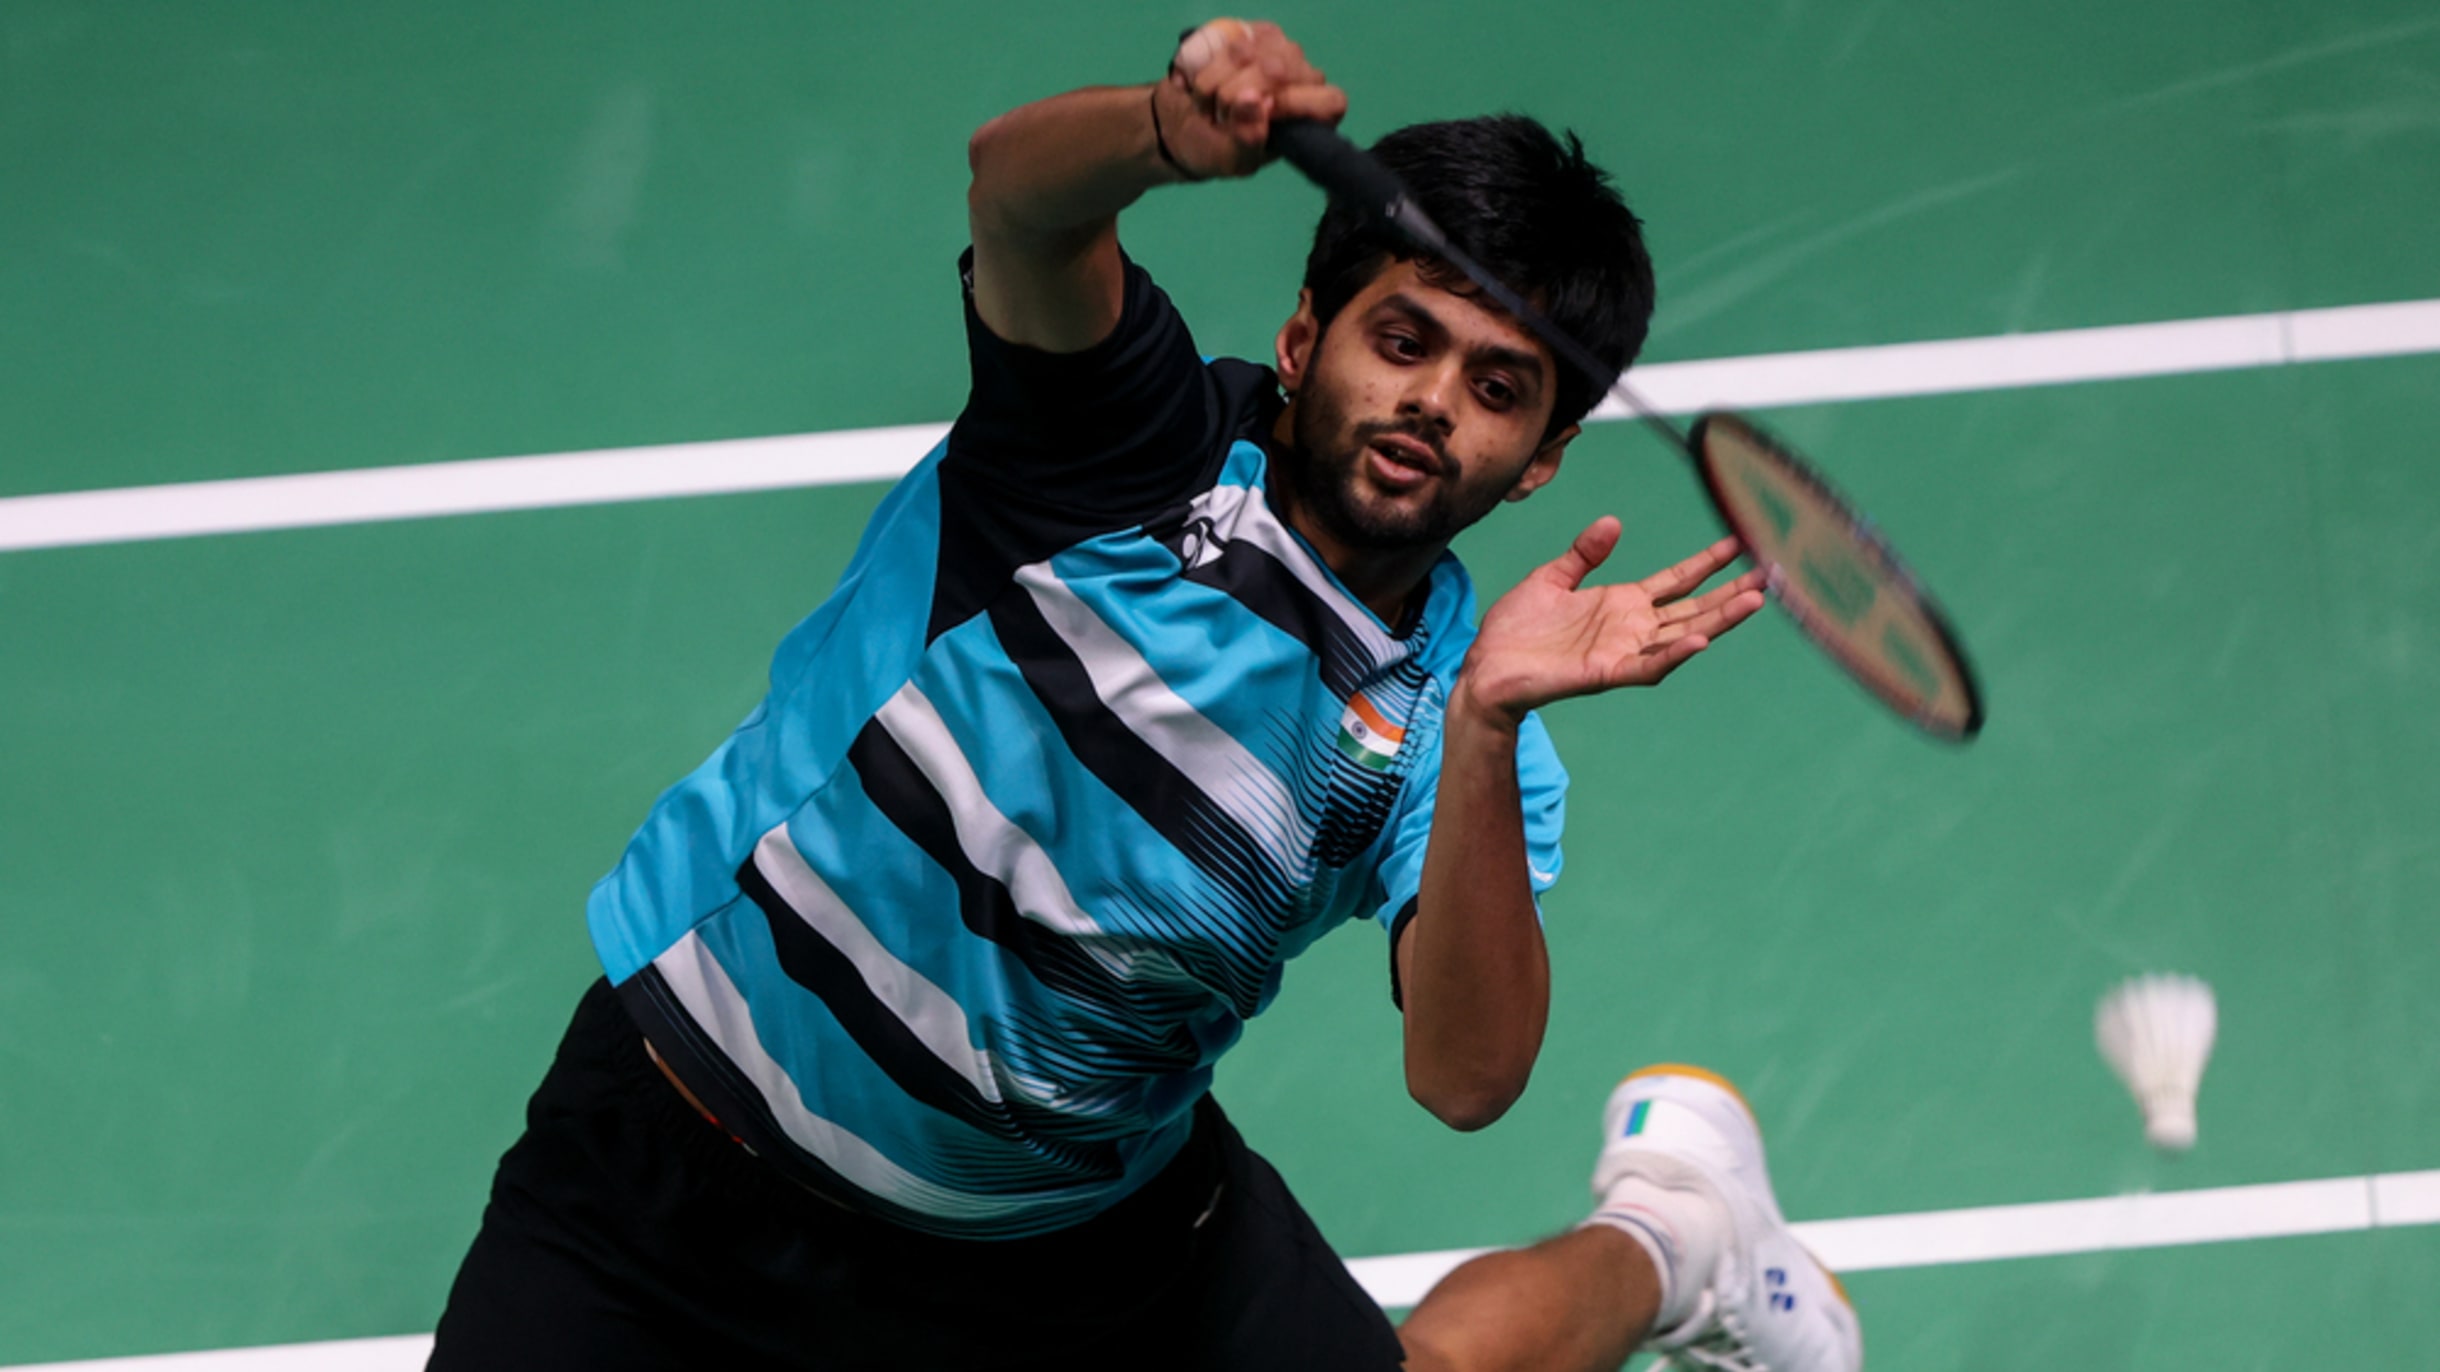 Sudirman Cup 2021 India take on China on Day 2, Get live badminton updates, results and scores